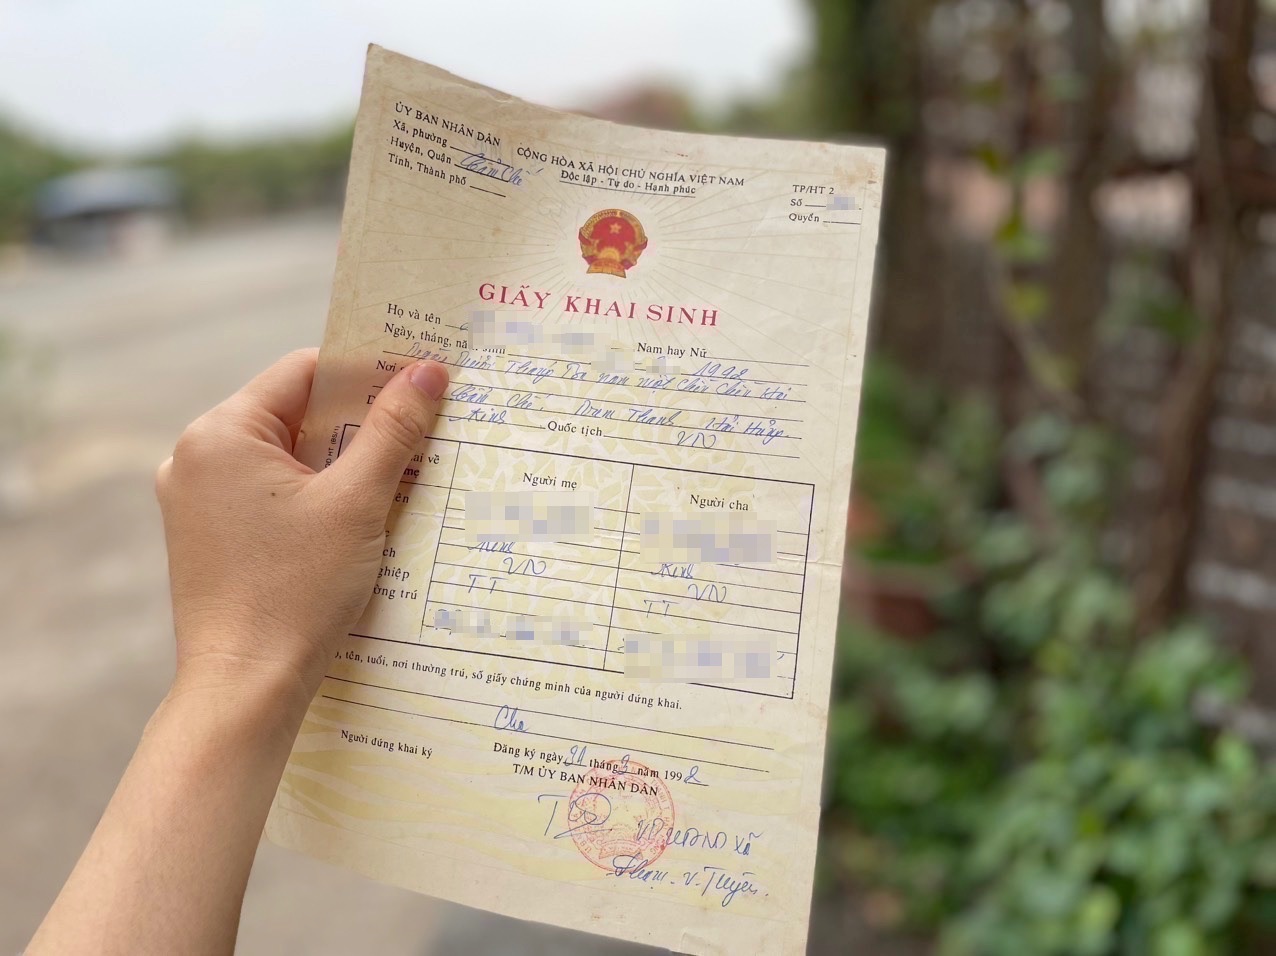 Is it allowed to change native place of an individual in the birth certificate in Vietnam?